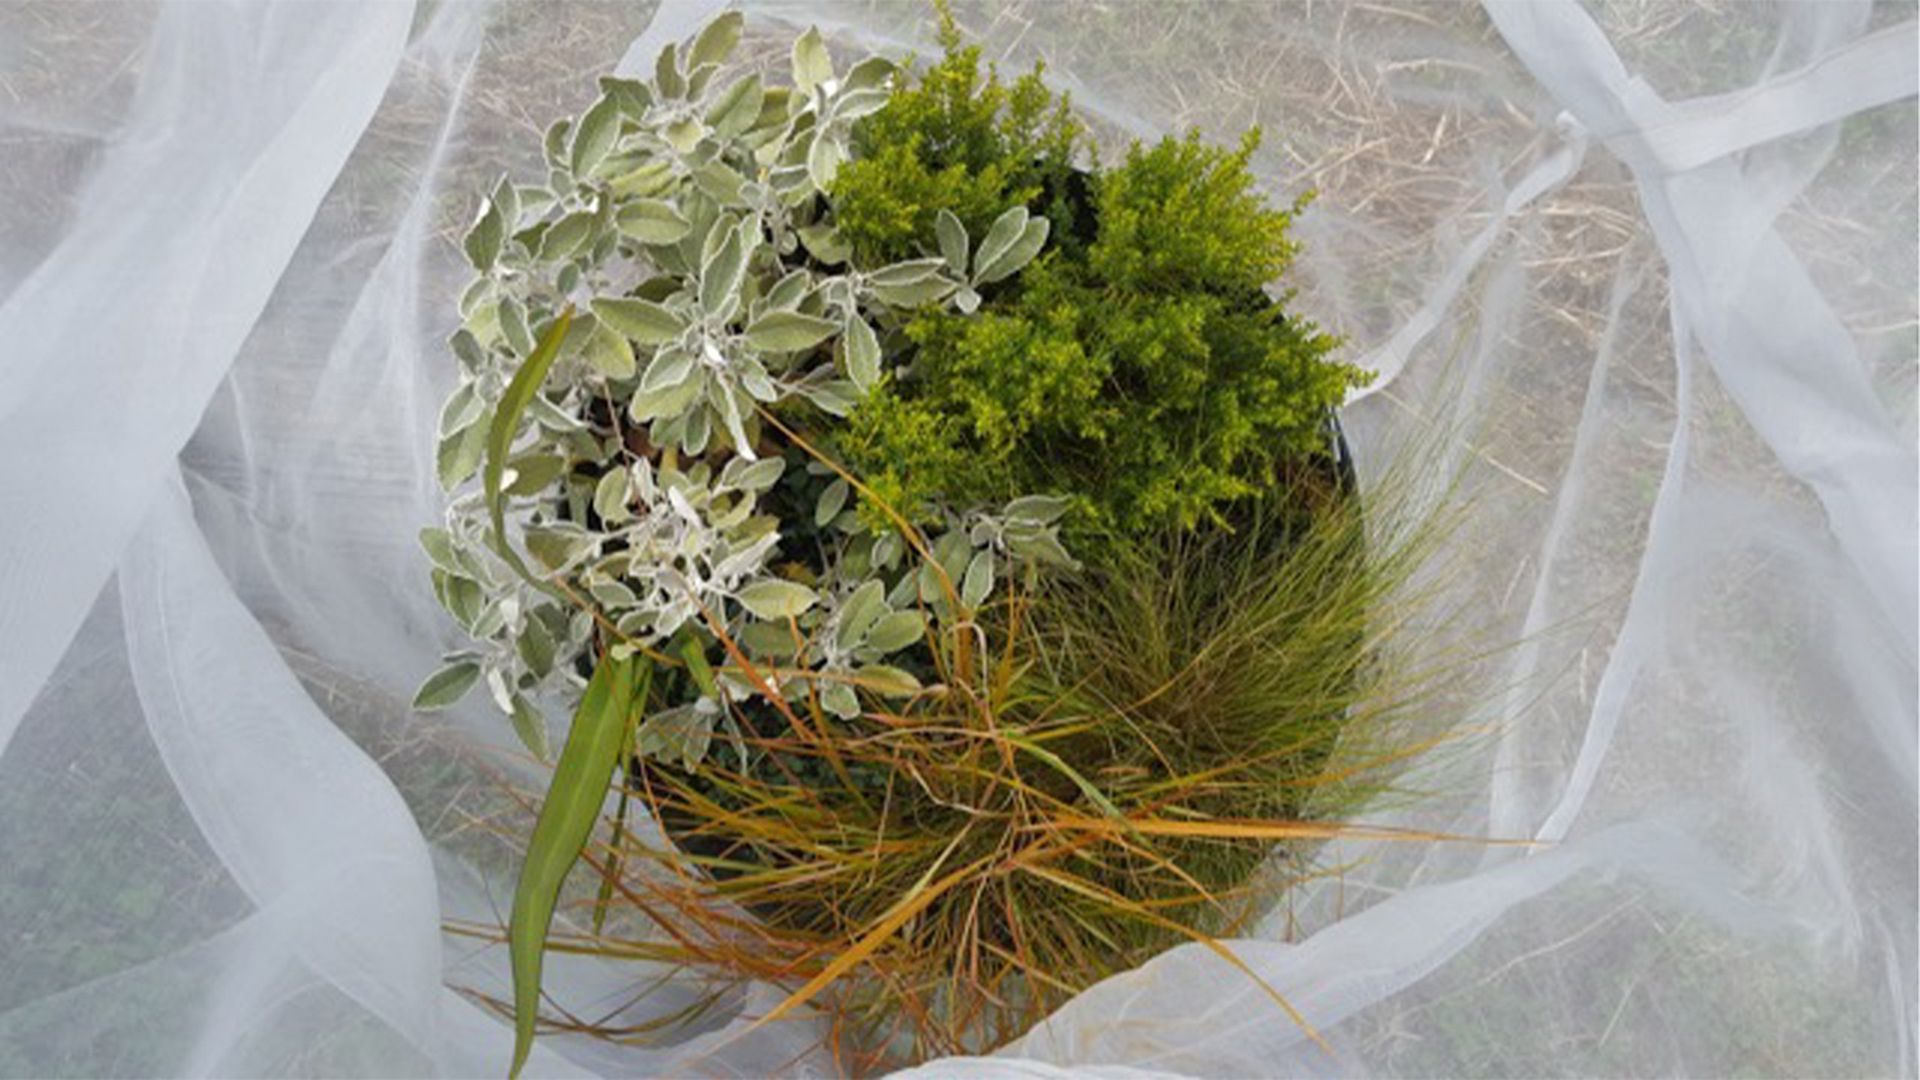 Experimental setup of different species of plants in a container covered with netting.